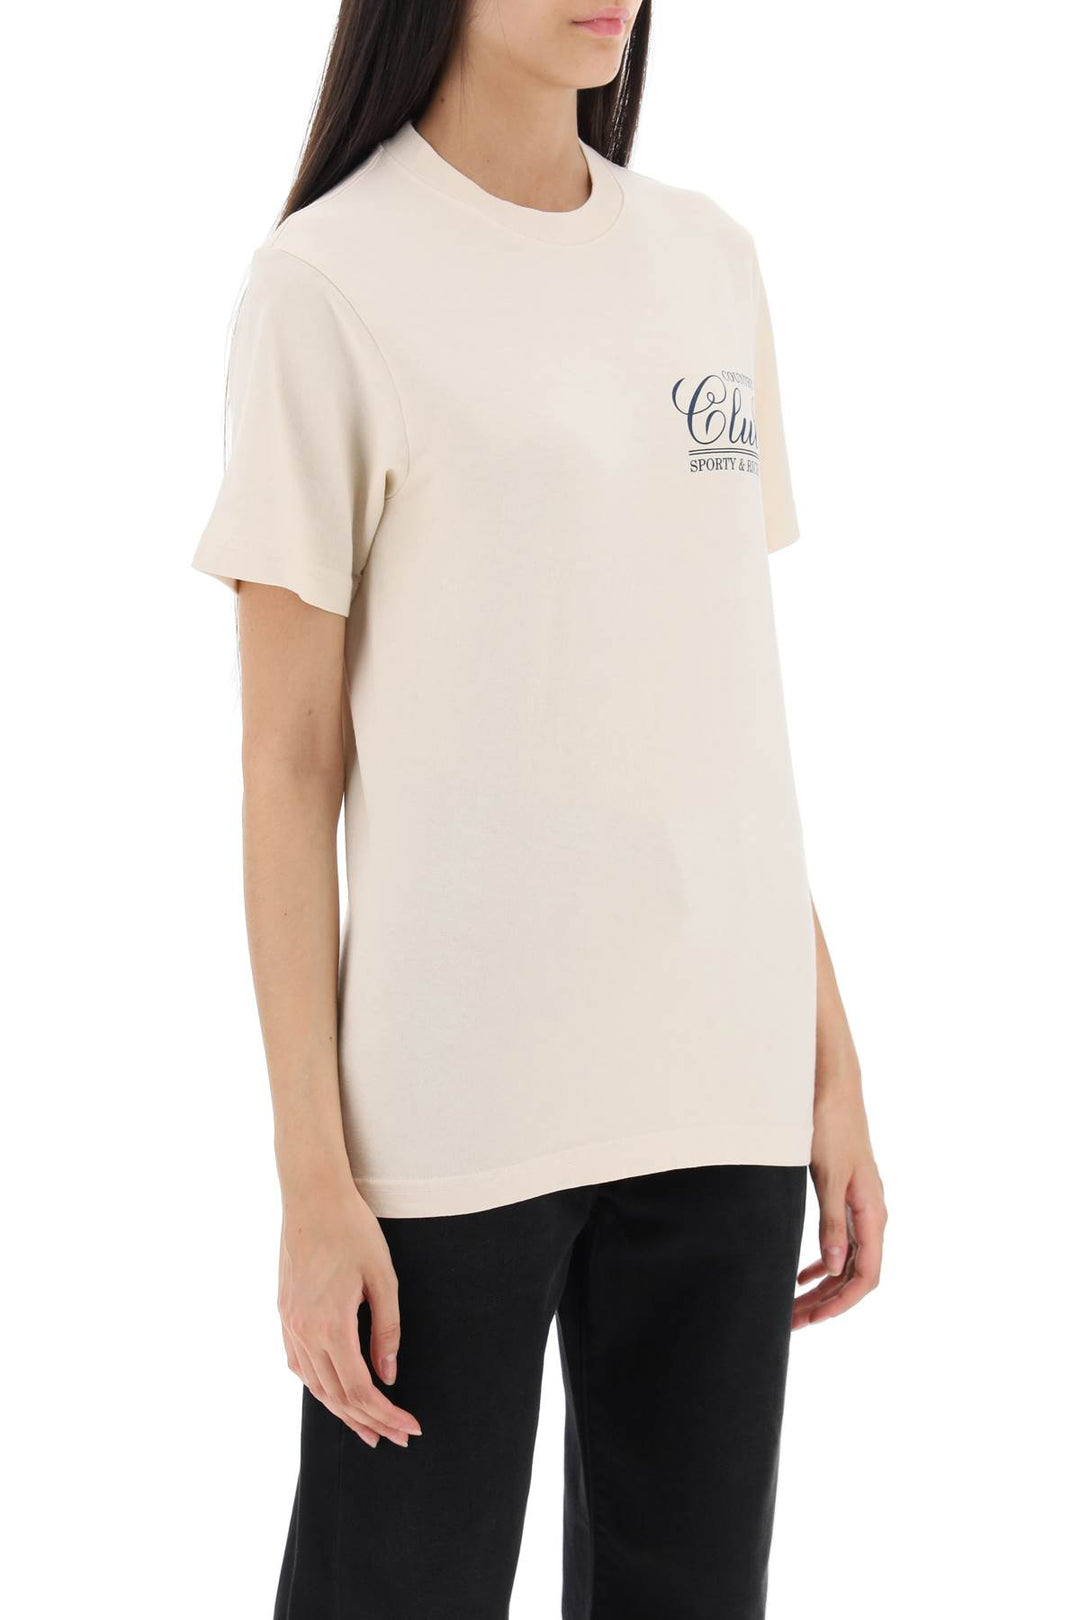 T Shirt '94 Country Club' - Sporty Rich - Donna